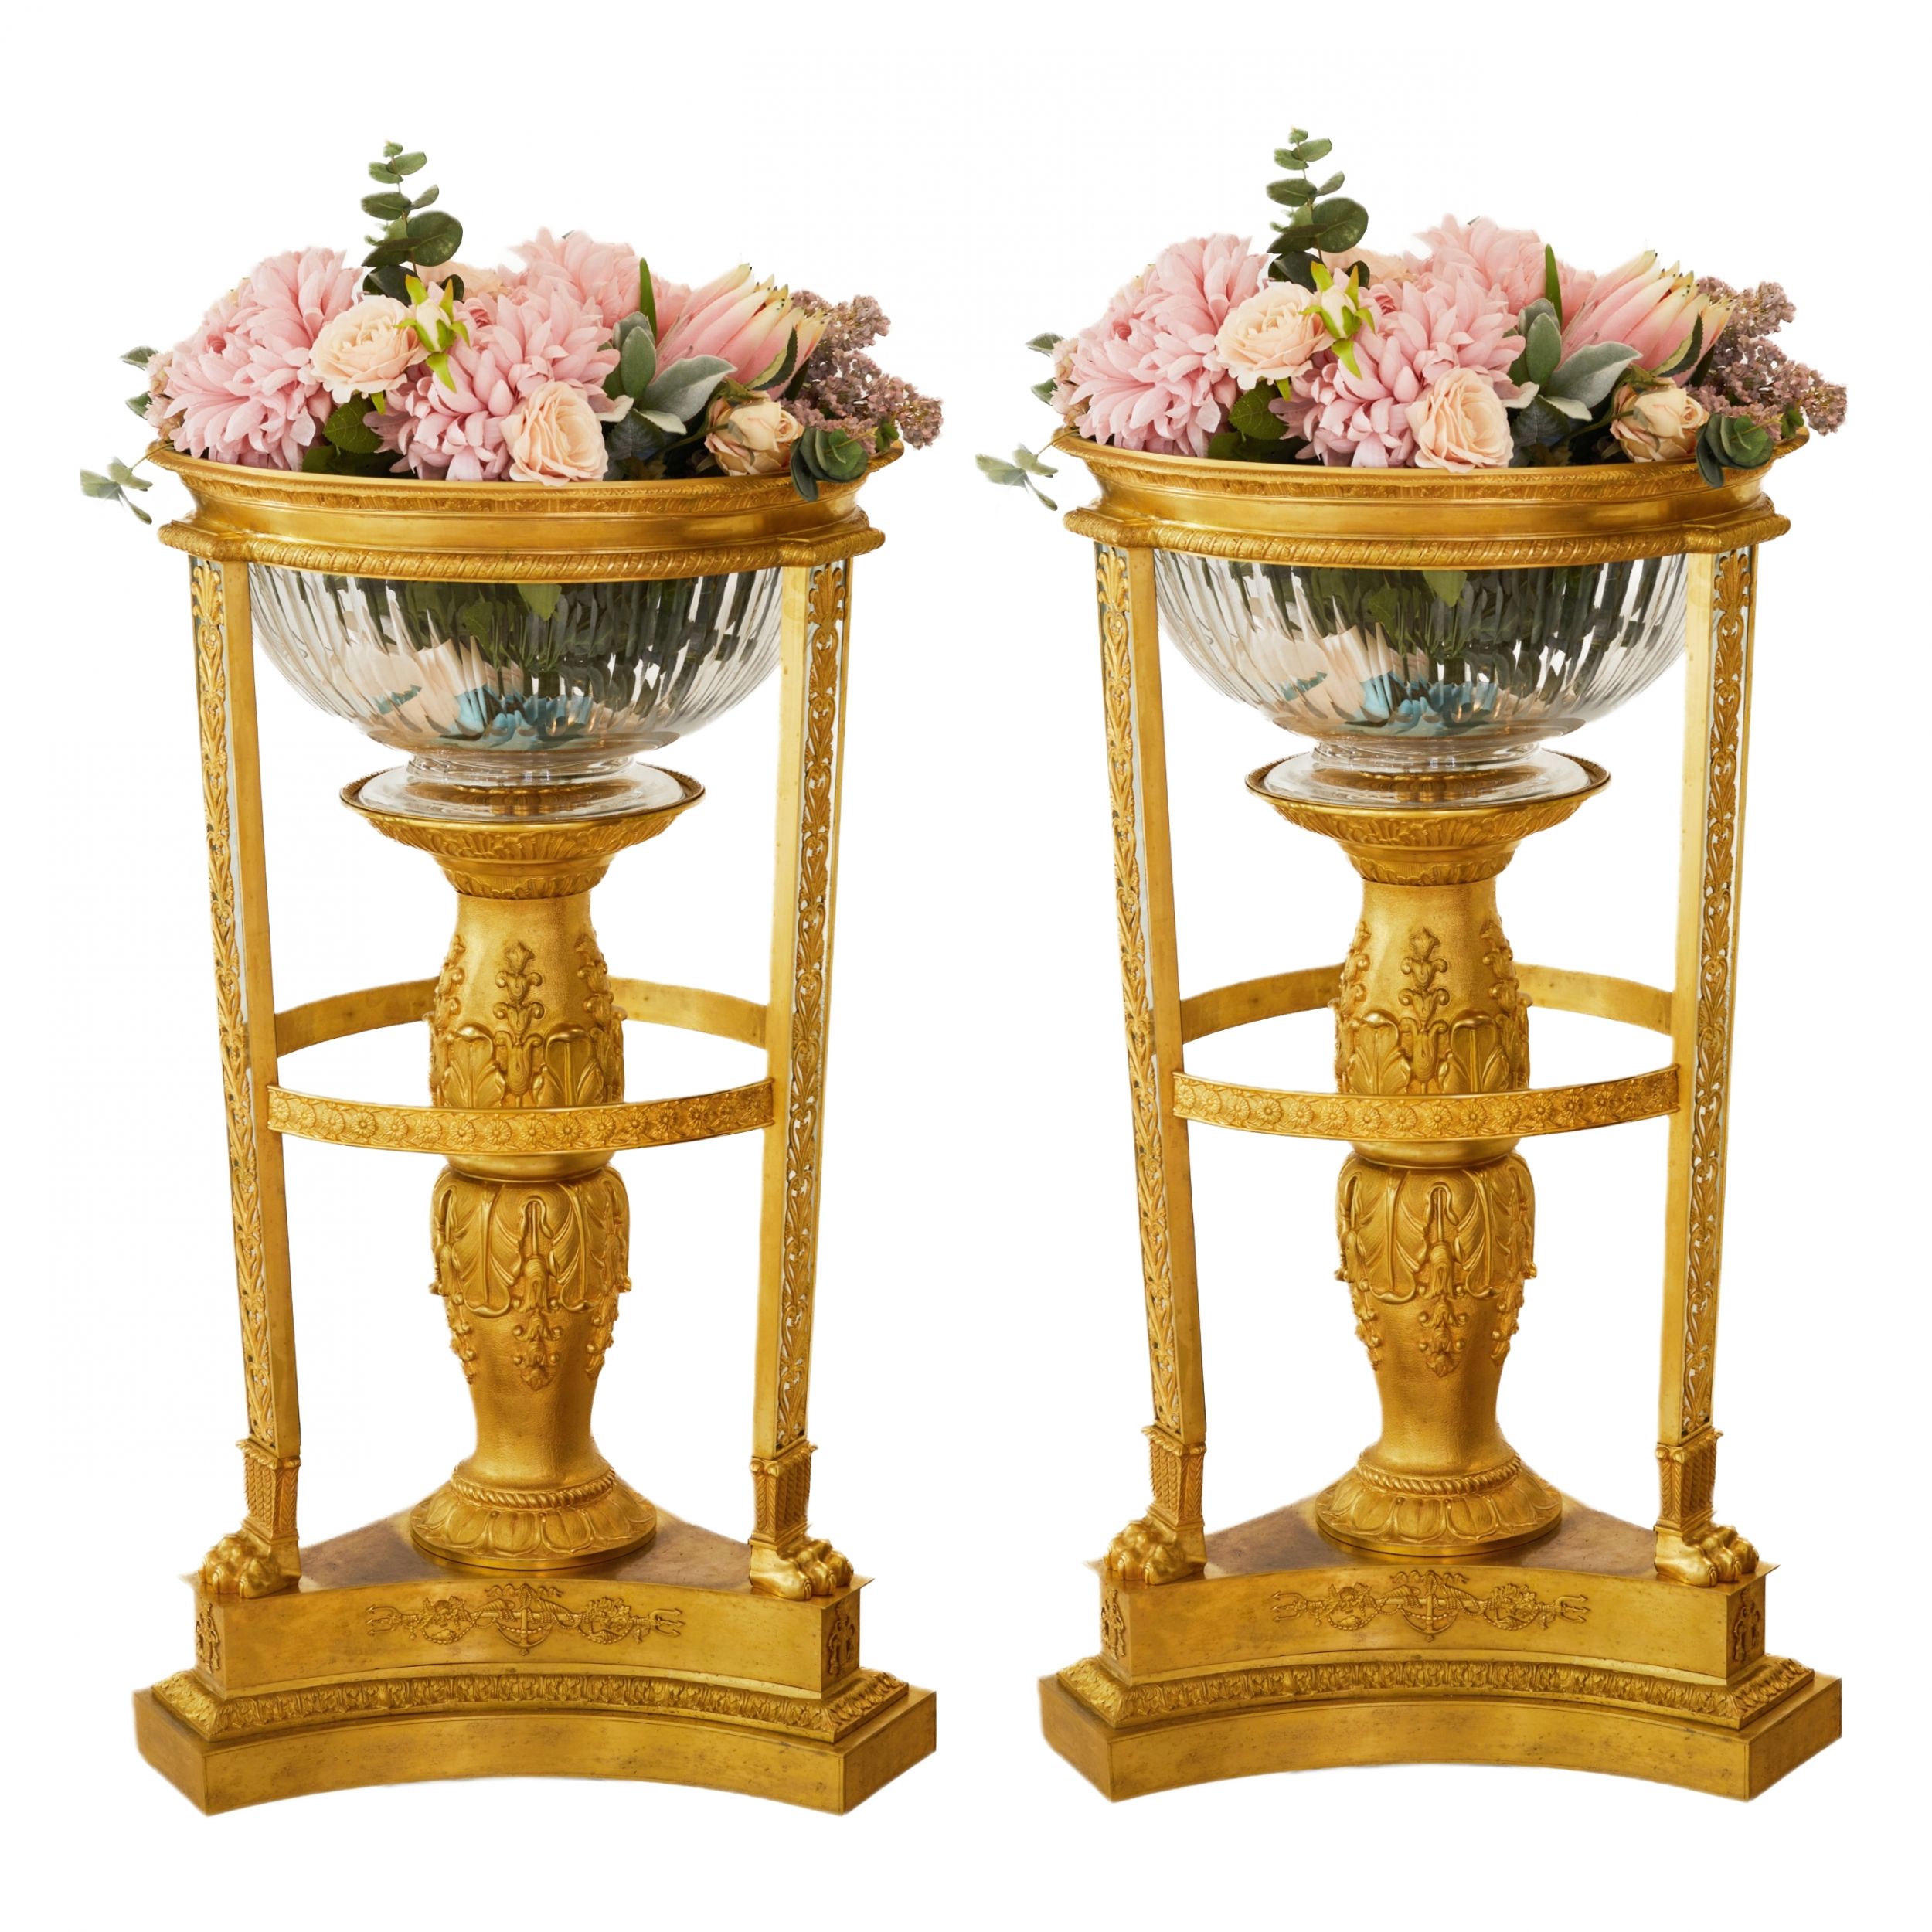 A-pair-of-grandiose-decorative-Jardiniere-Flowerpots-in-the-style-of-Napoleon-III-France-The-turn-of-the-19th-20th-century-